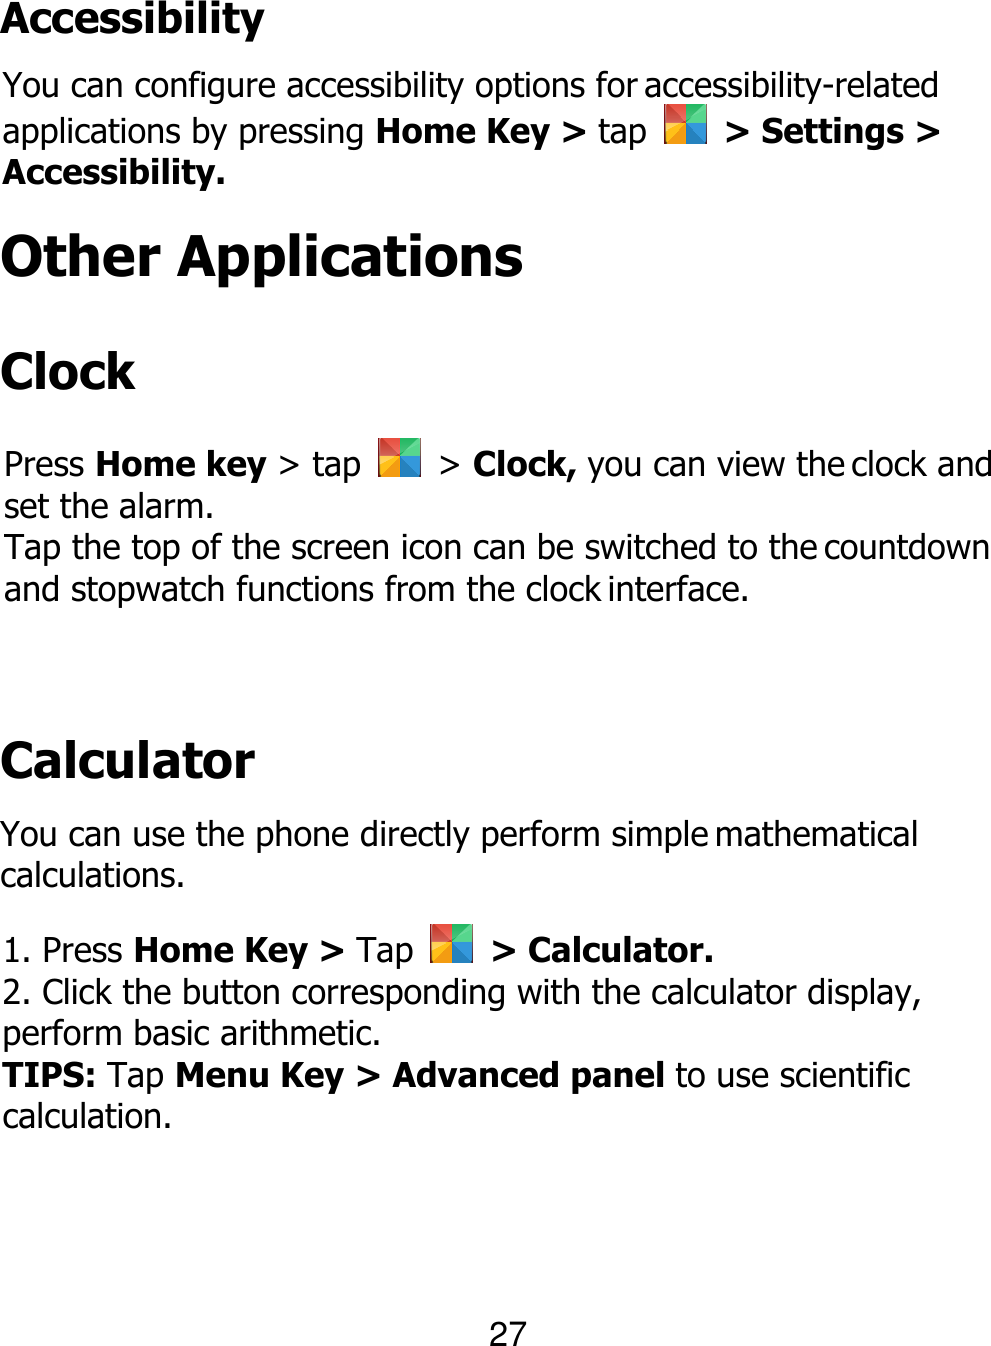  Accessibility You can configure accessibility options for accessibility-related applications by pressing Home Key &gt; tap    &gt; Settings &gt; Accessibility. Other Applications Clock Press Home key &gt; tap    &gt; Clock, you can view the clock and set the alarm. Tap the top of the screen icon can be switched to the countdown and stopwatch functions from the clock interface. Calculator You can use the phone directly perform simple mathematical calculations. 1. Press Home Key &gt; Tap    &gt; Calculator. 2. Click the button corresponding with the calculator display, perform basic arithmetic. TIPS: Tap Menu Key &gt; Advanced panel to use scientific calculation. 27 